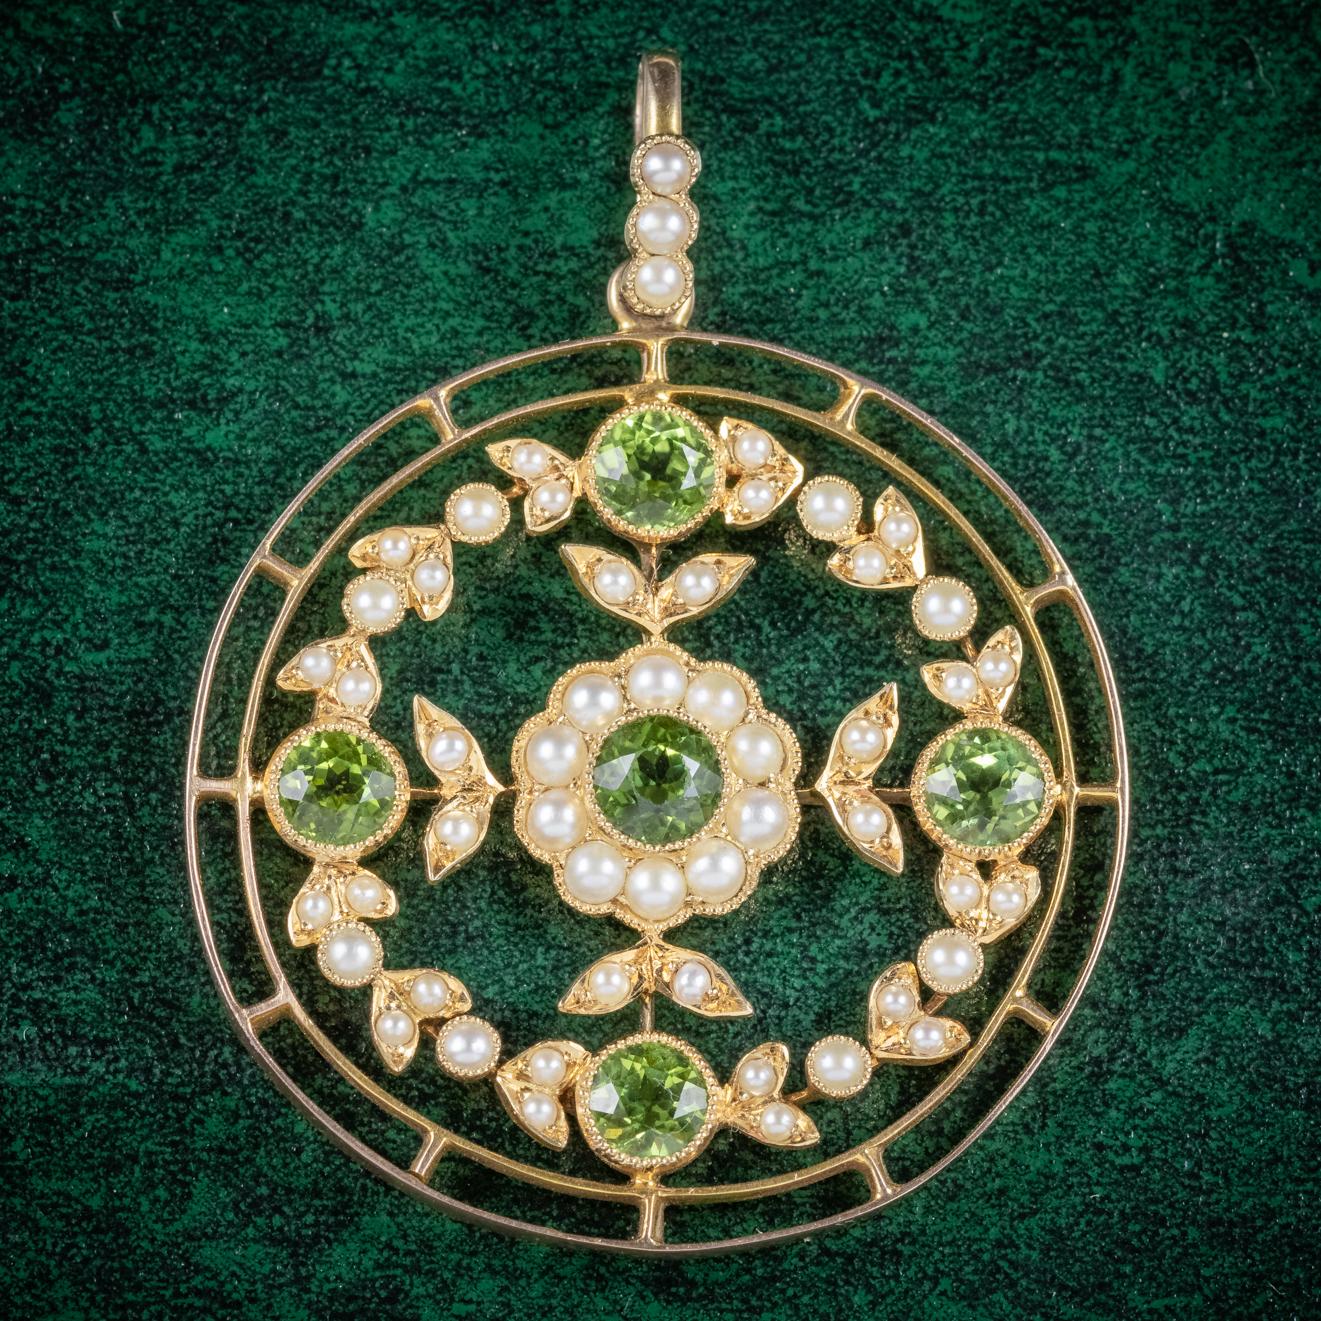 A fabulous antique Victorian floral pendant C. 1900, adorned with five rich green Peridot’s and decorated in lovely natural Pearls. 

The largest Peridot is 0.50ct and crowned in the centre of a flower with a halo of Pearl petals. The rest of the